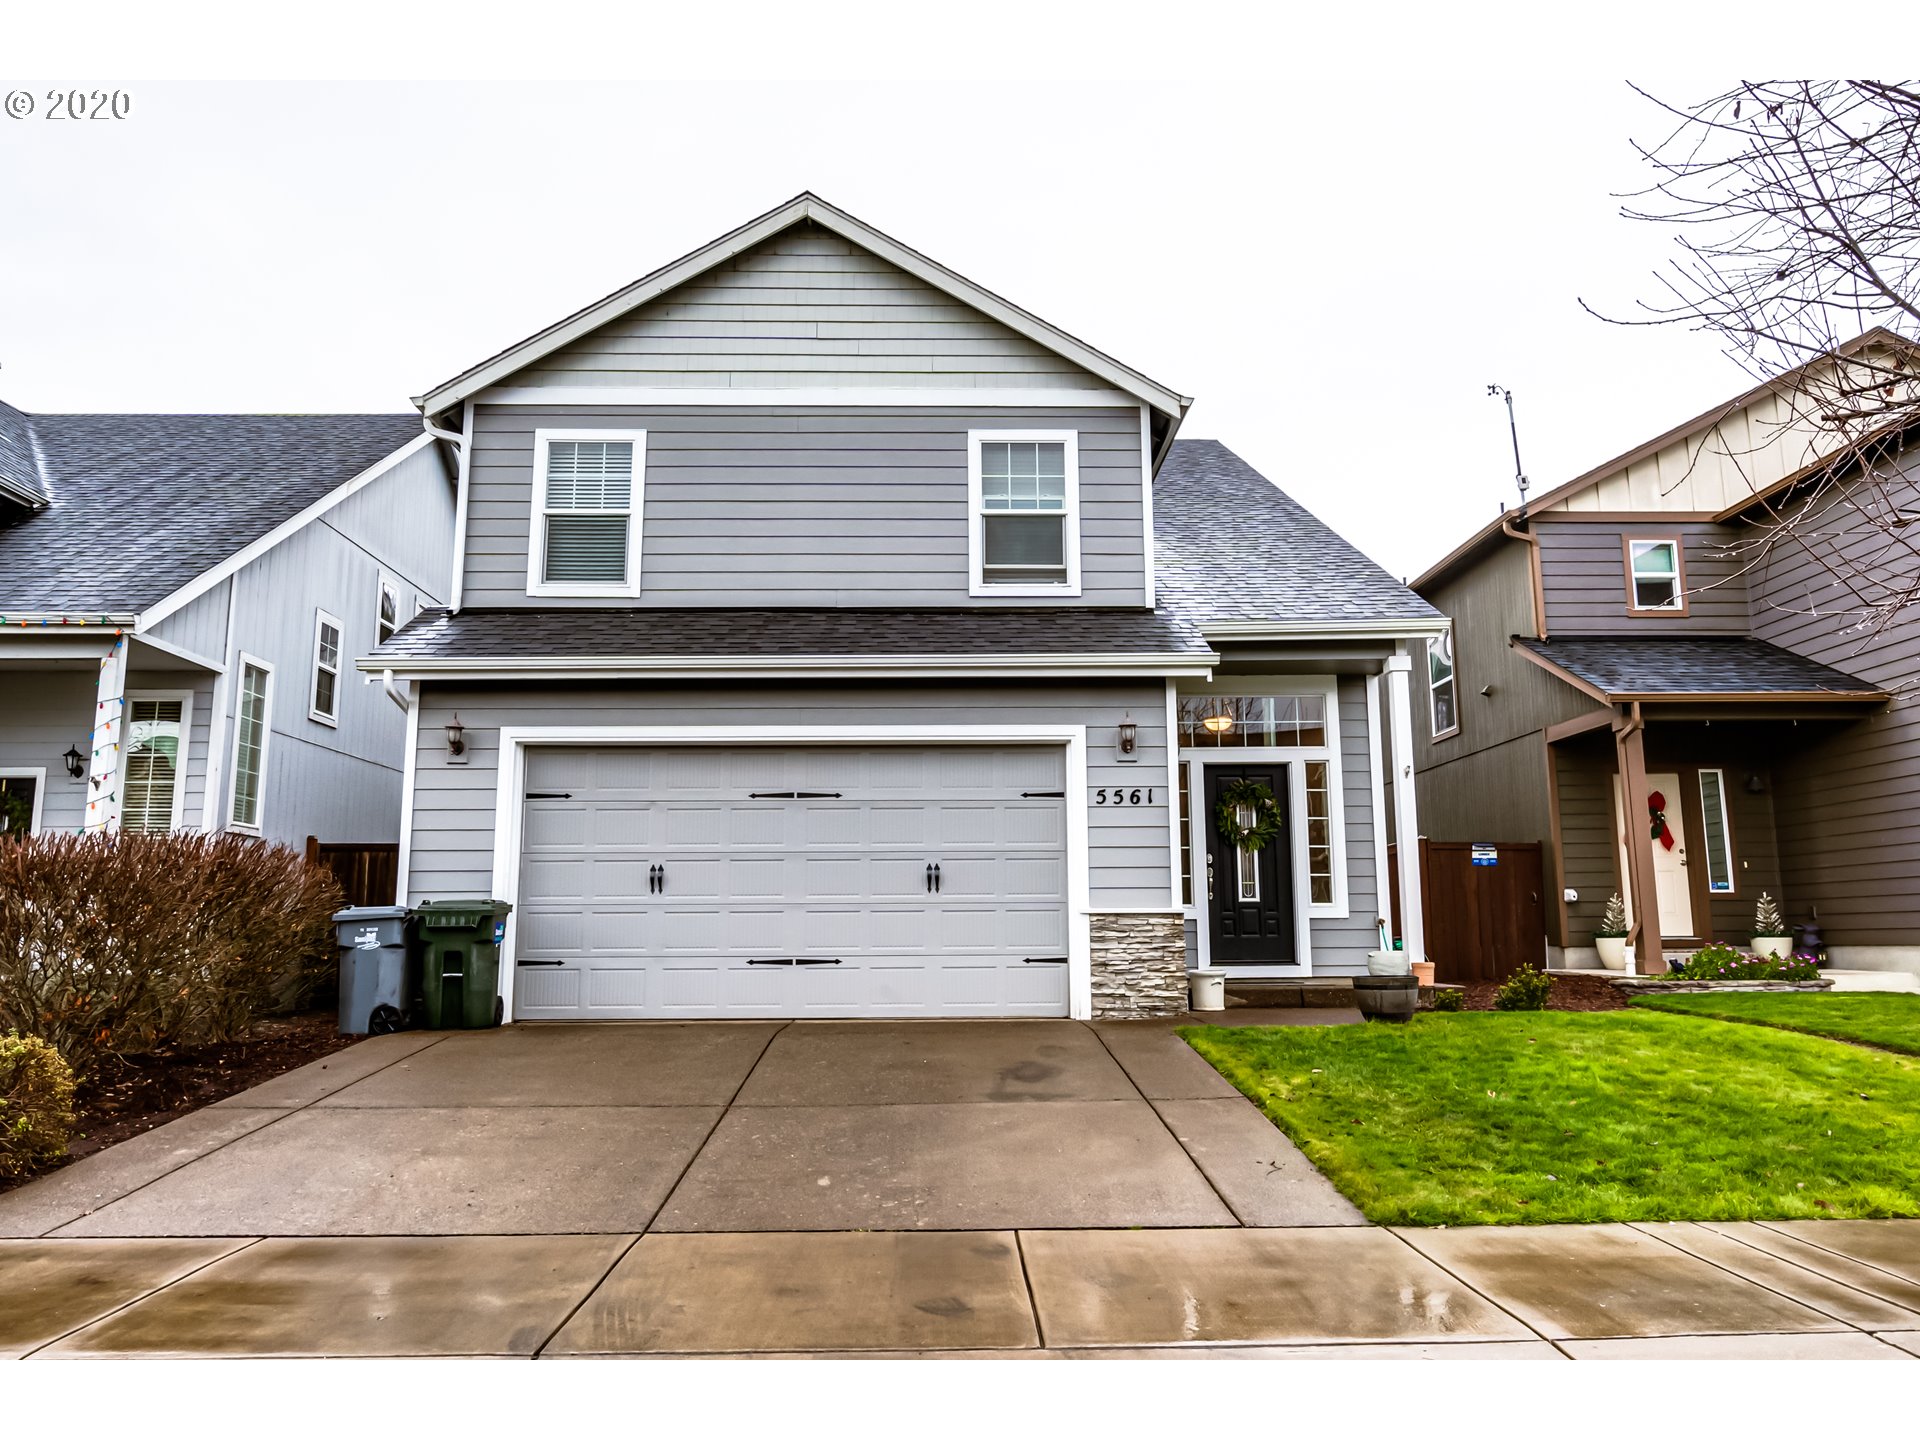 5561 EXCALIBER LN (1 of 31)